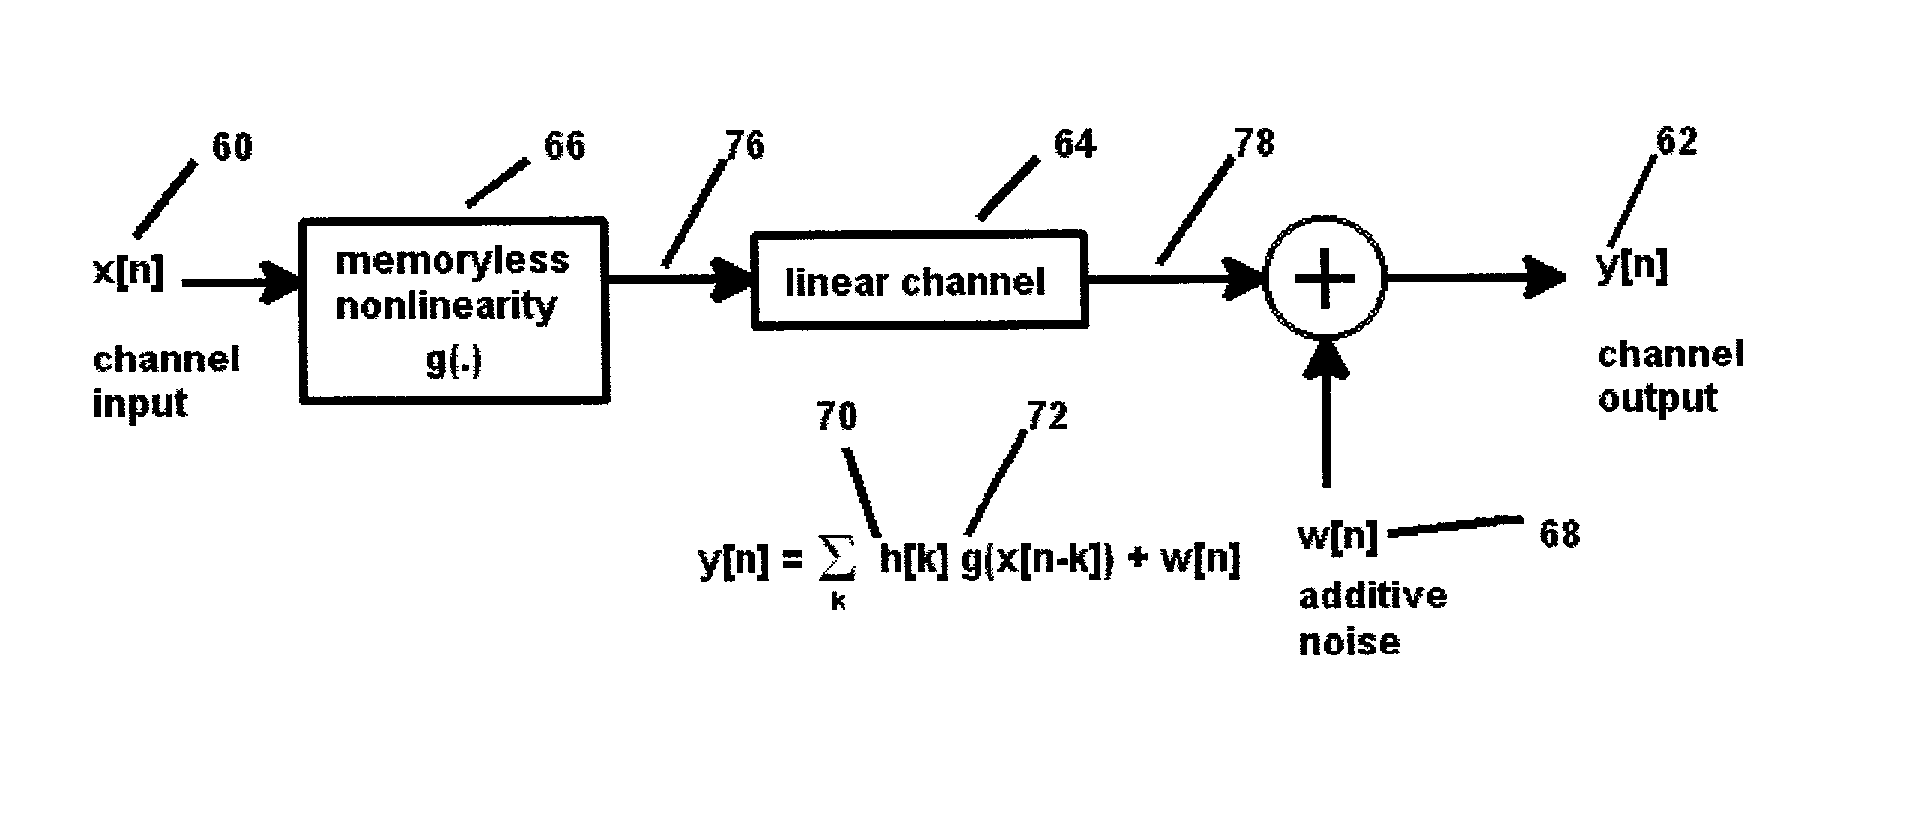 Symbol constellations having second-order statistics with cyclostationary phase